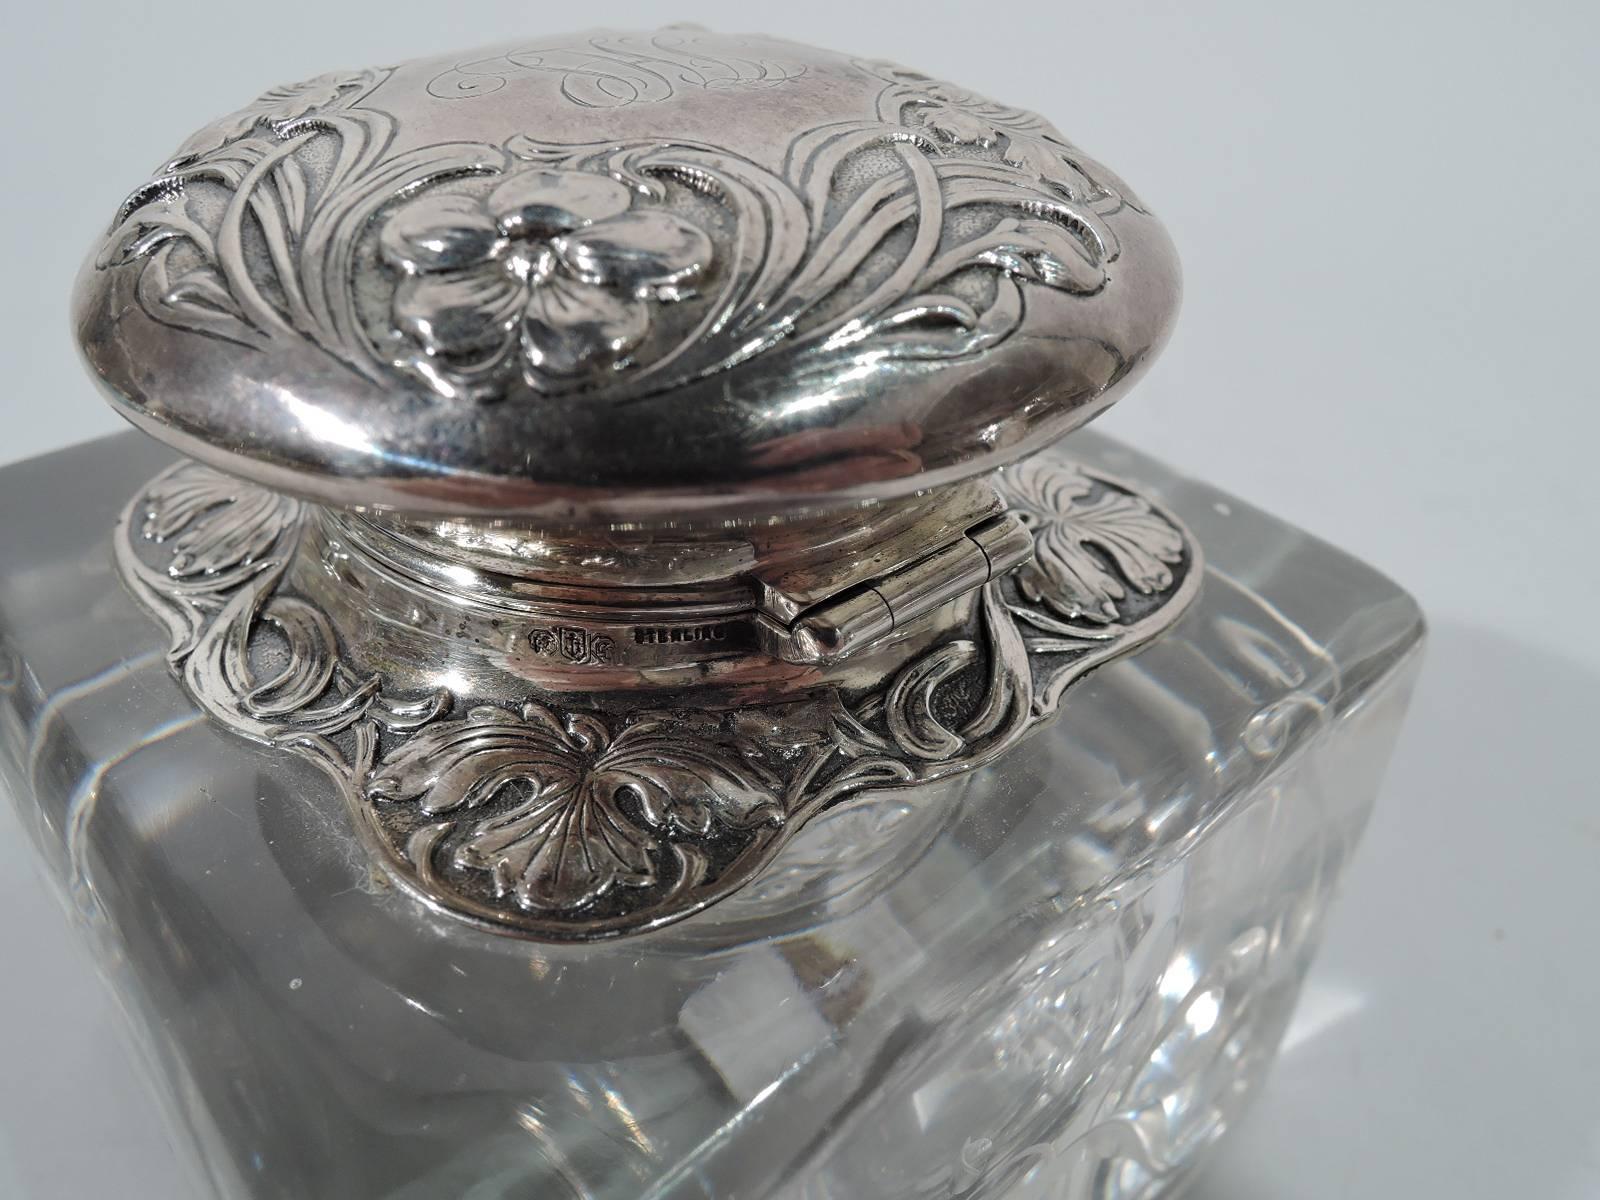 20th Century American Art Nouveau Sterling Silver and Glass Inkwell by Gorham For Sale